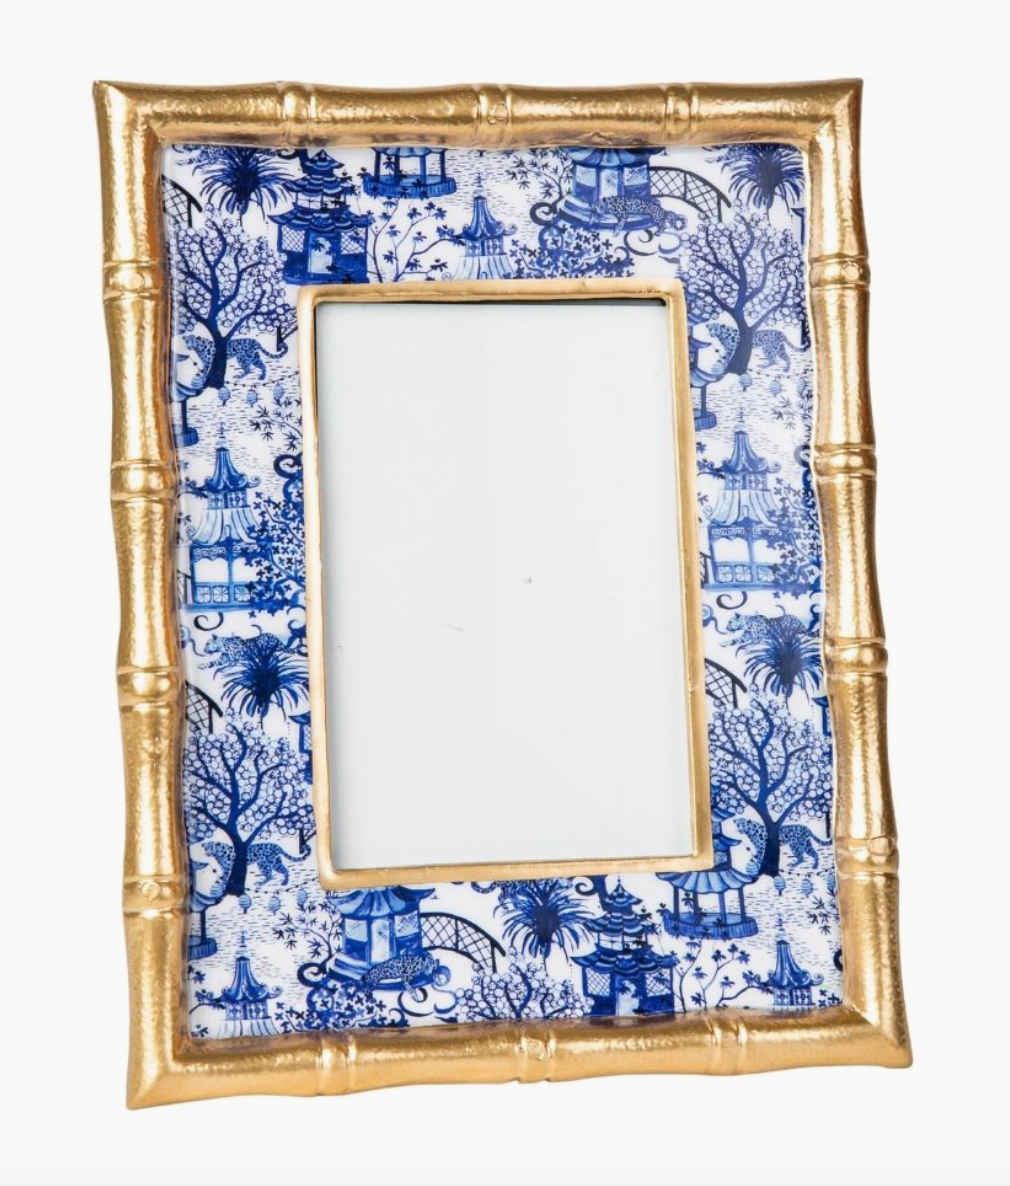 Garden Party Frame - Blue, White and Gold - 4*6